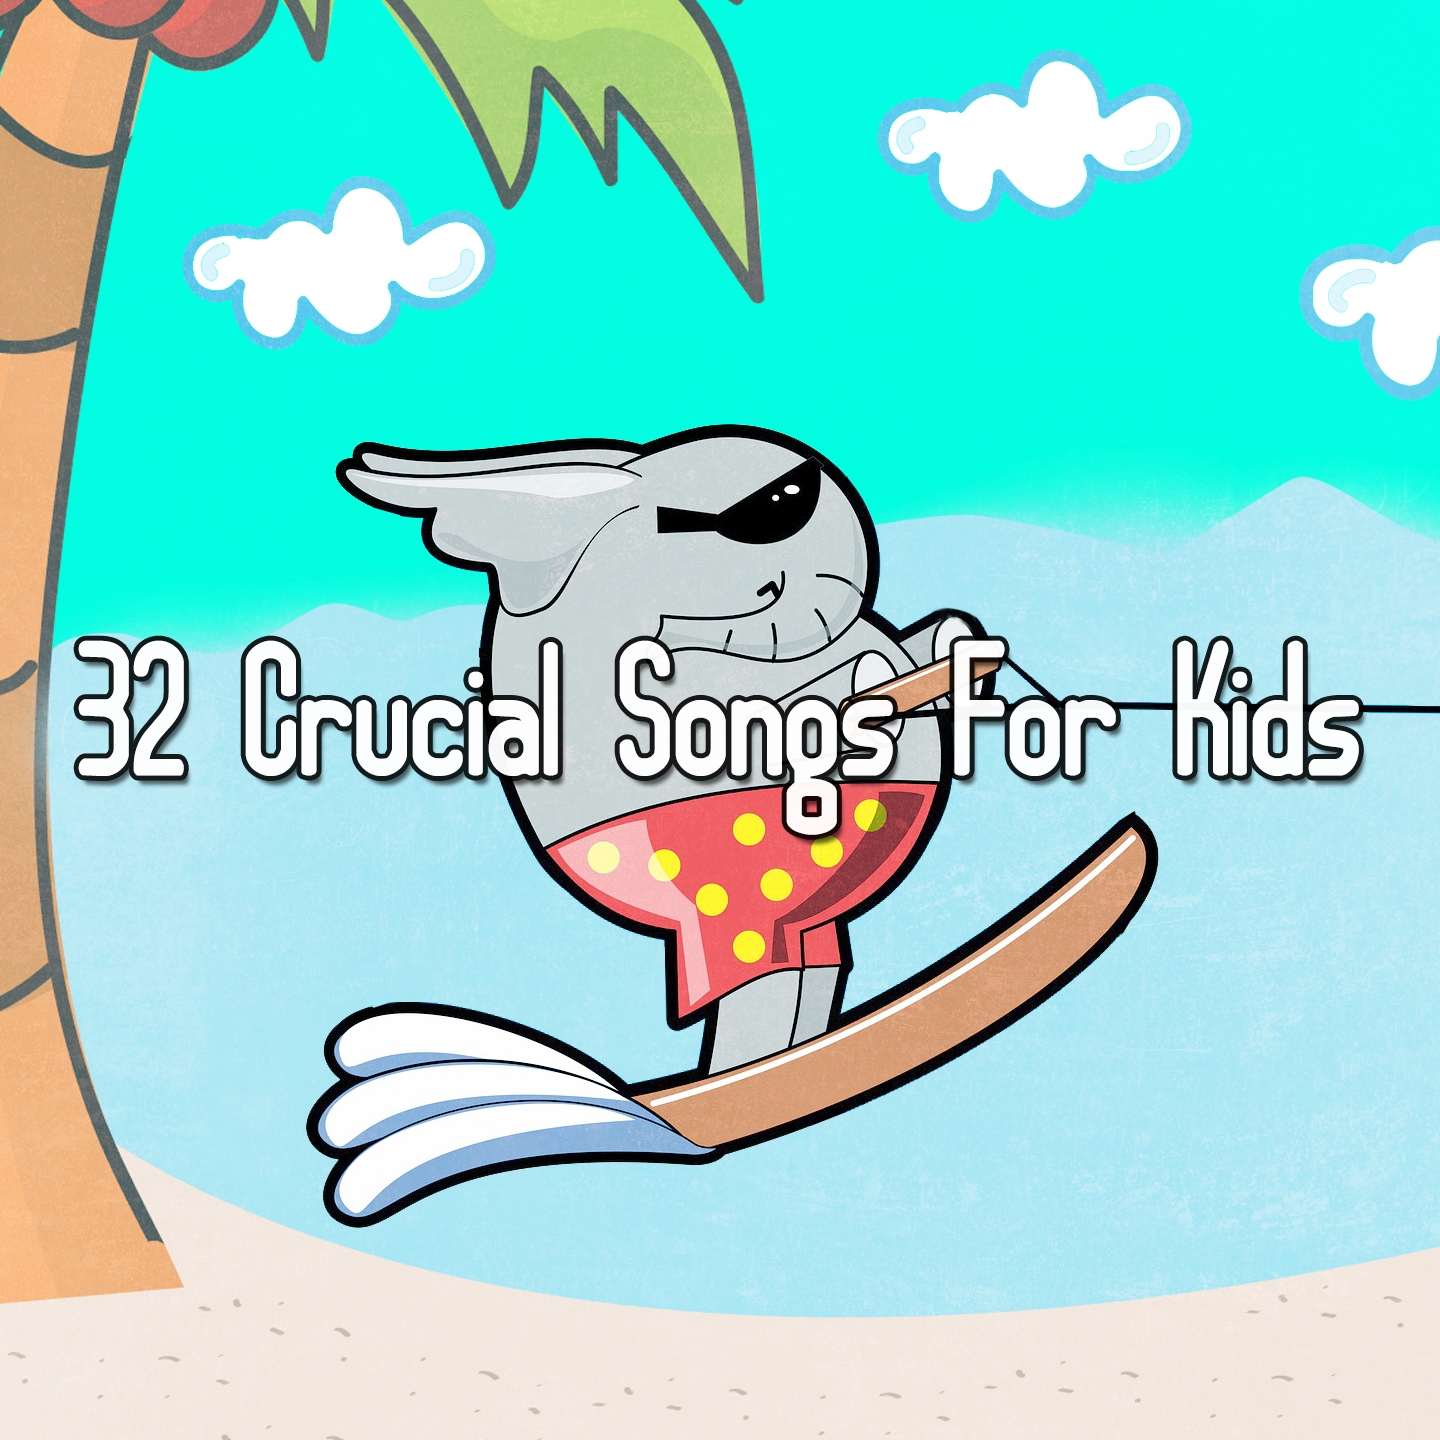 32 Crucial Songs For Kids